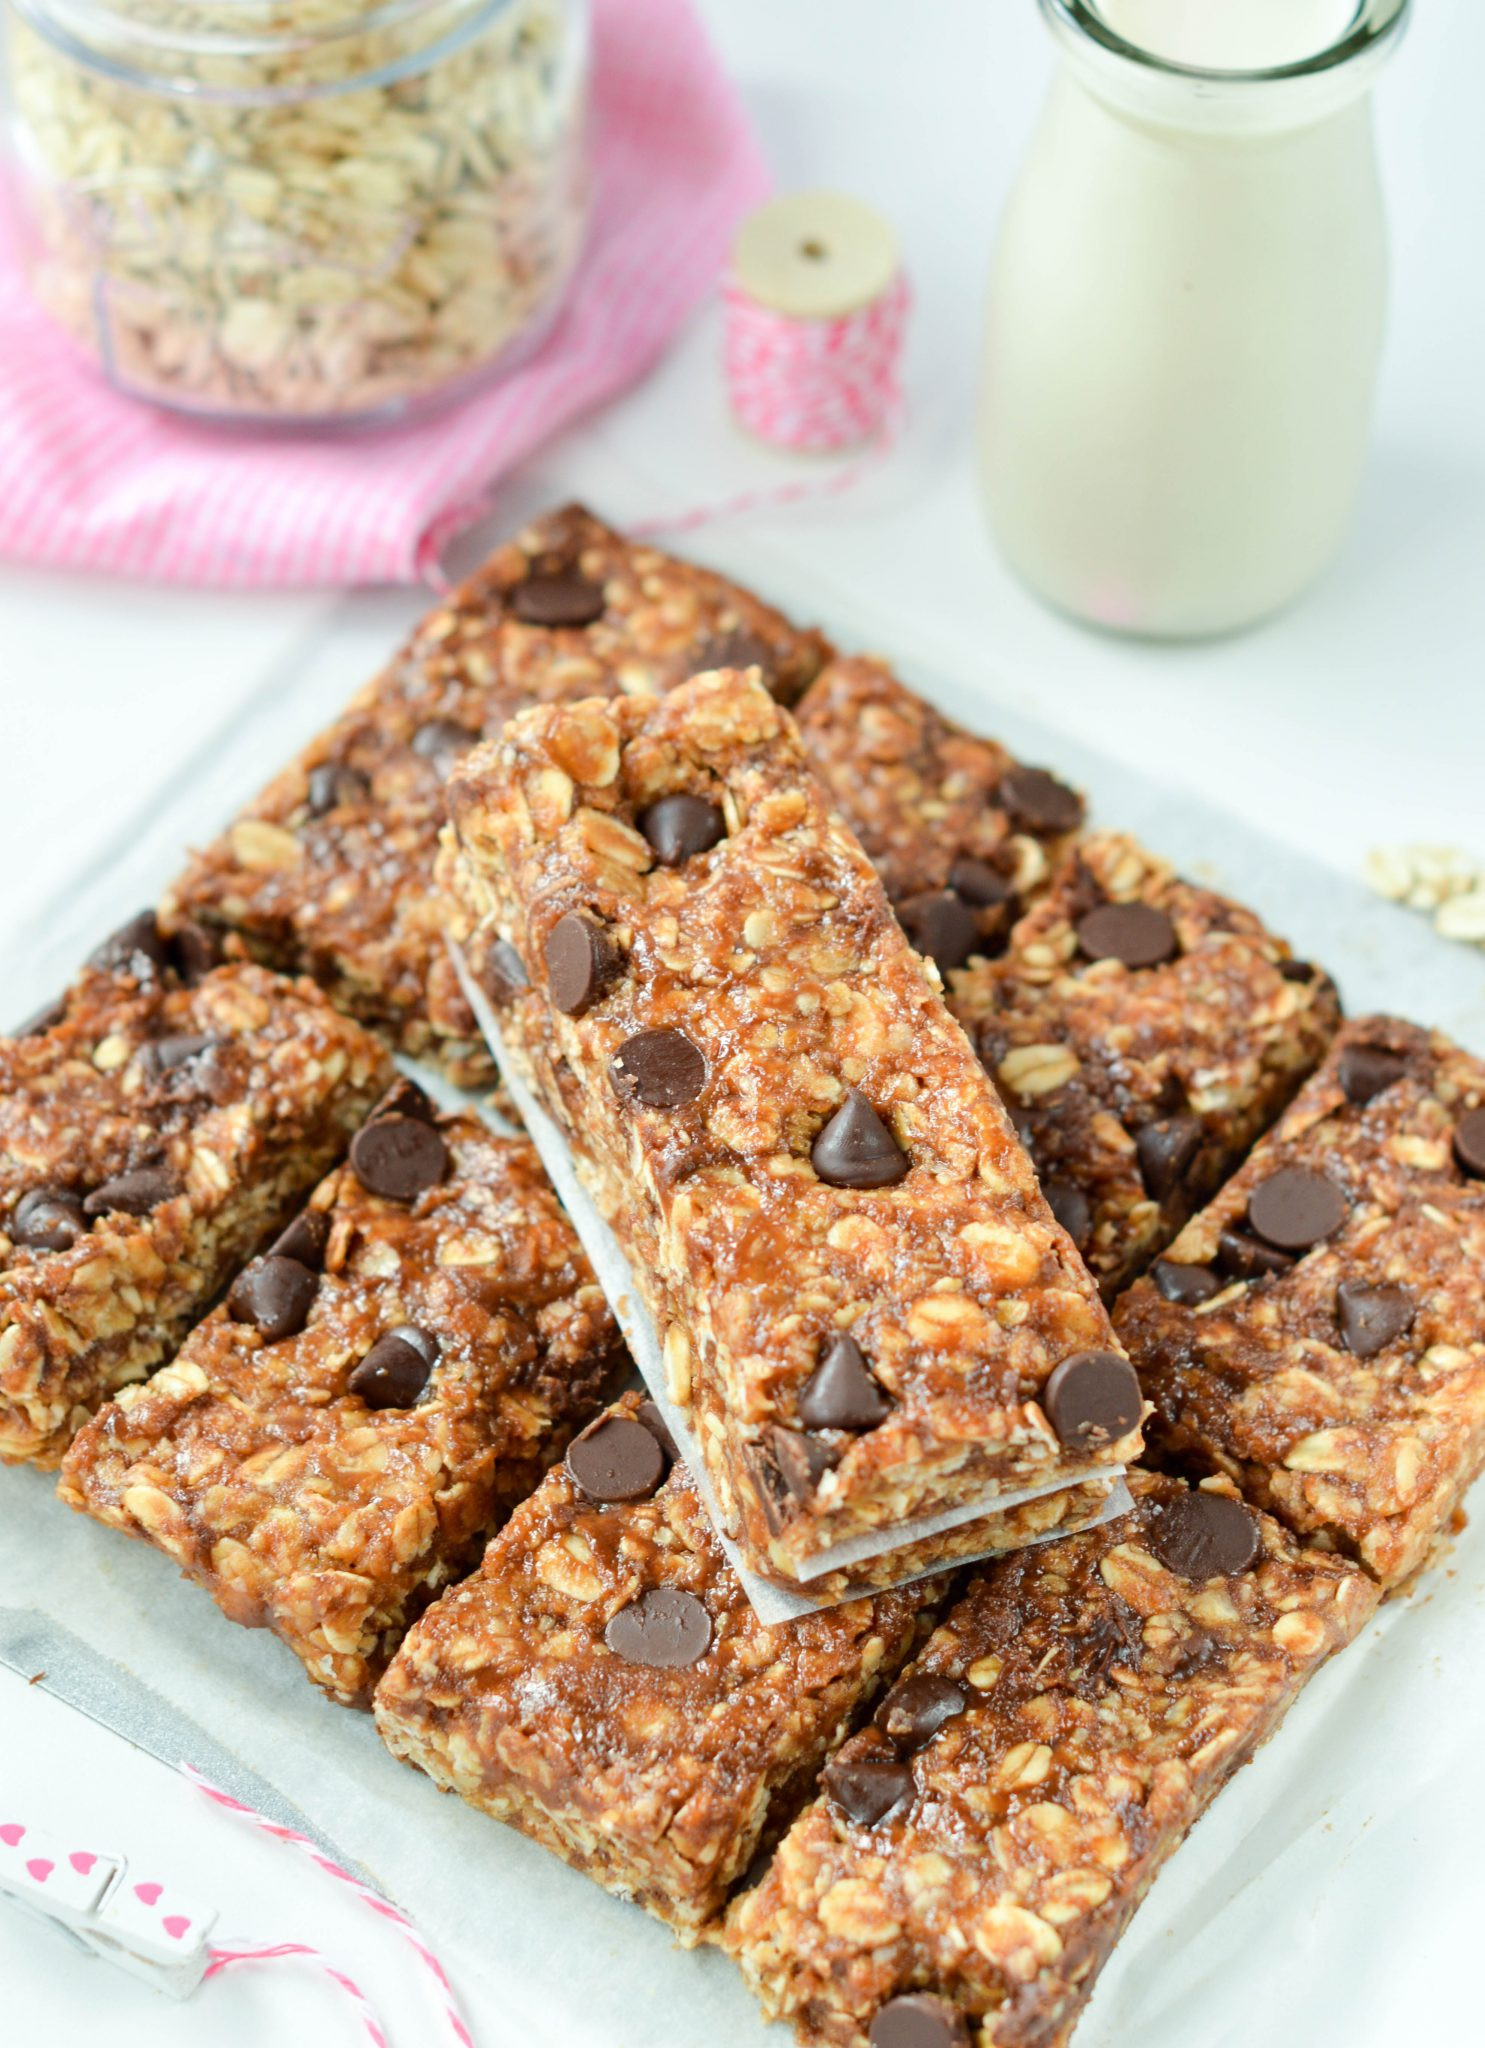 Vegetarian Protein Bars Inspirational 3 Healthy Vegan Protein Bars for Your Snack Time at Work